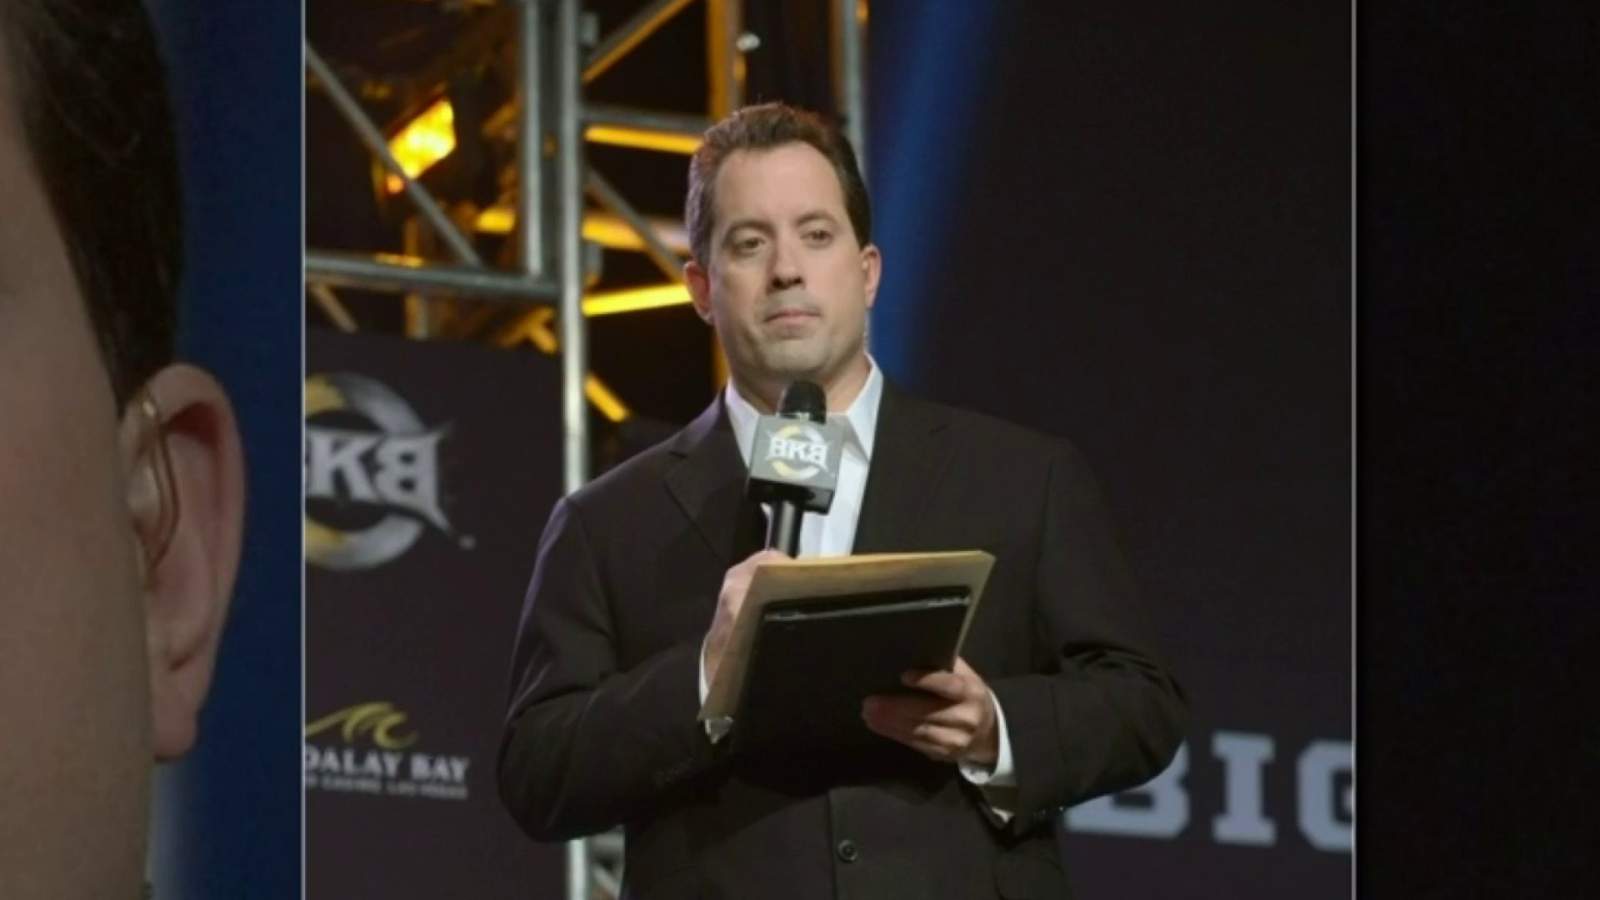 Benched: Sports Broadcaster Kenny Albert